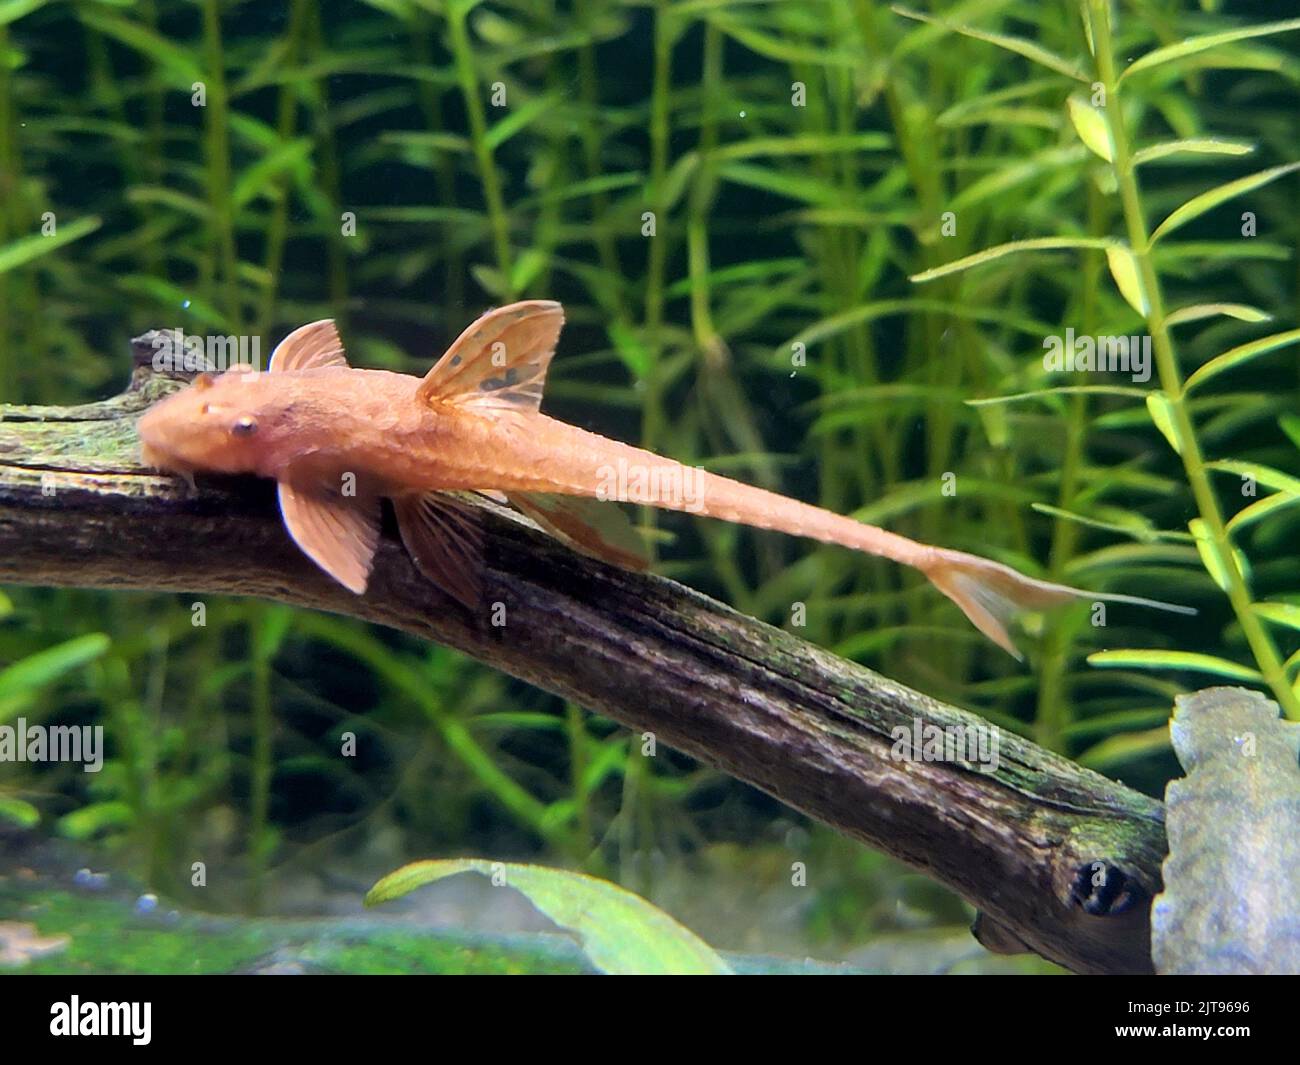 The red lizard catfish on wood in background of water plants Stock Photo